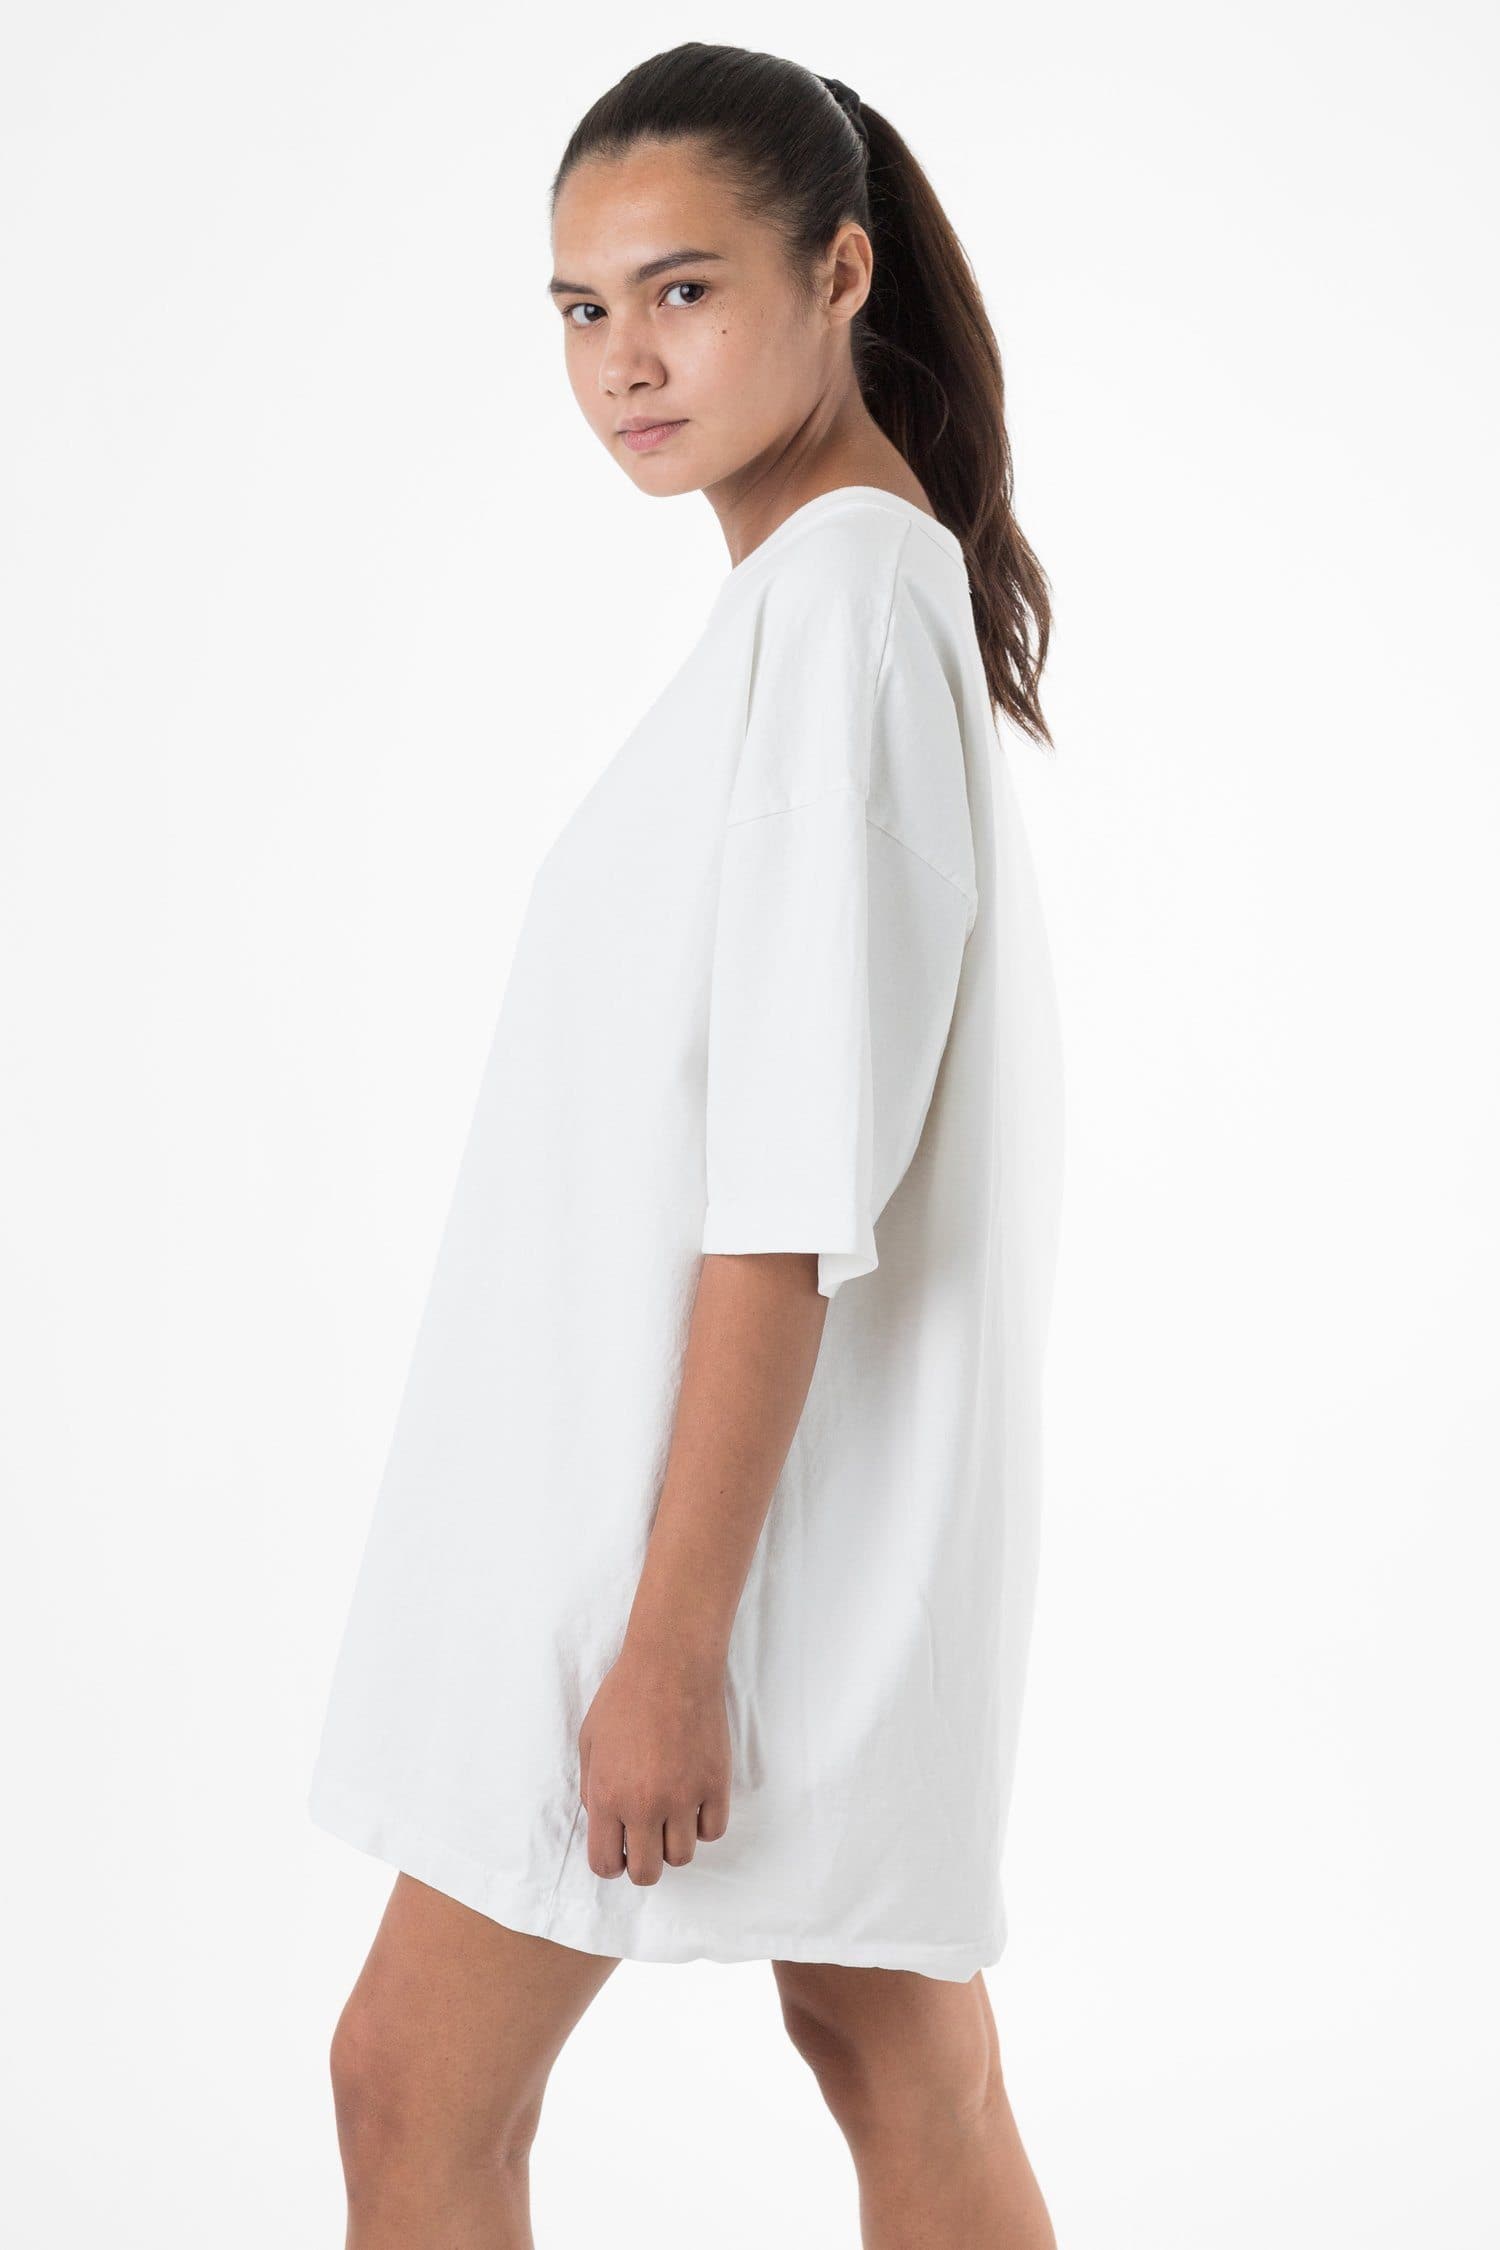 Los Angeles Apparel | Wide T-Shirt for Women in Off White, Size XS